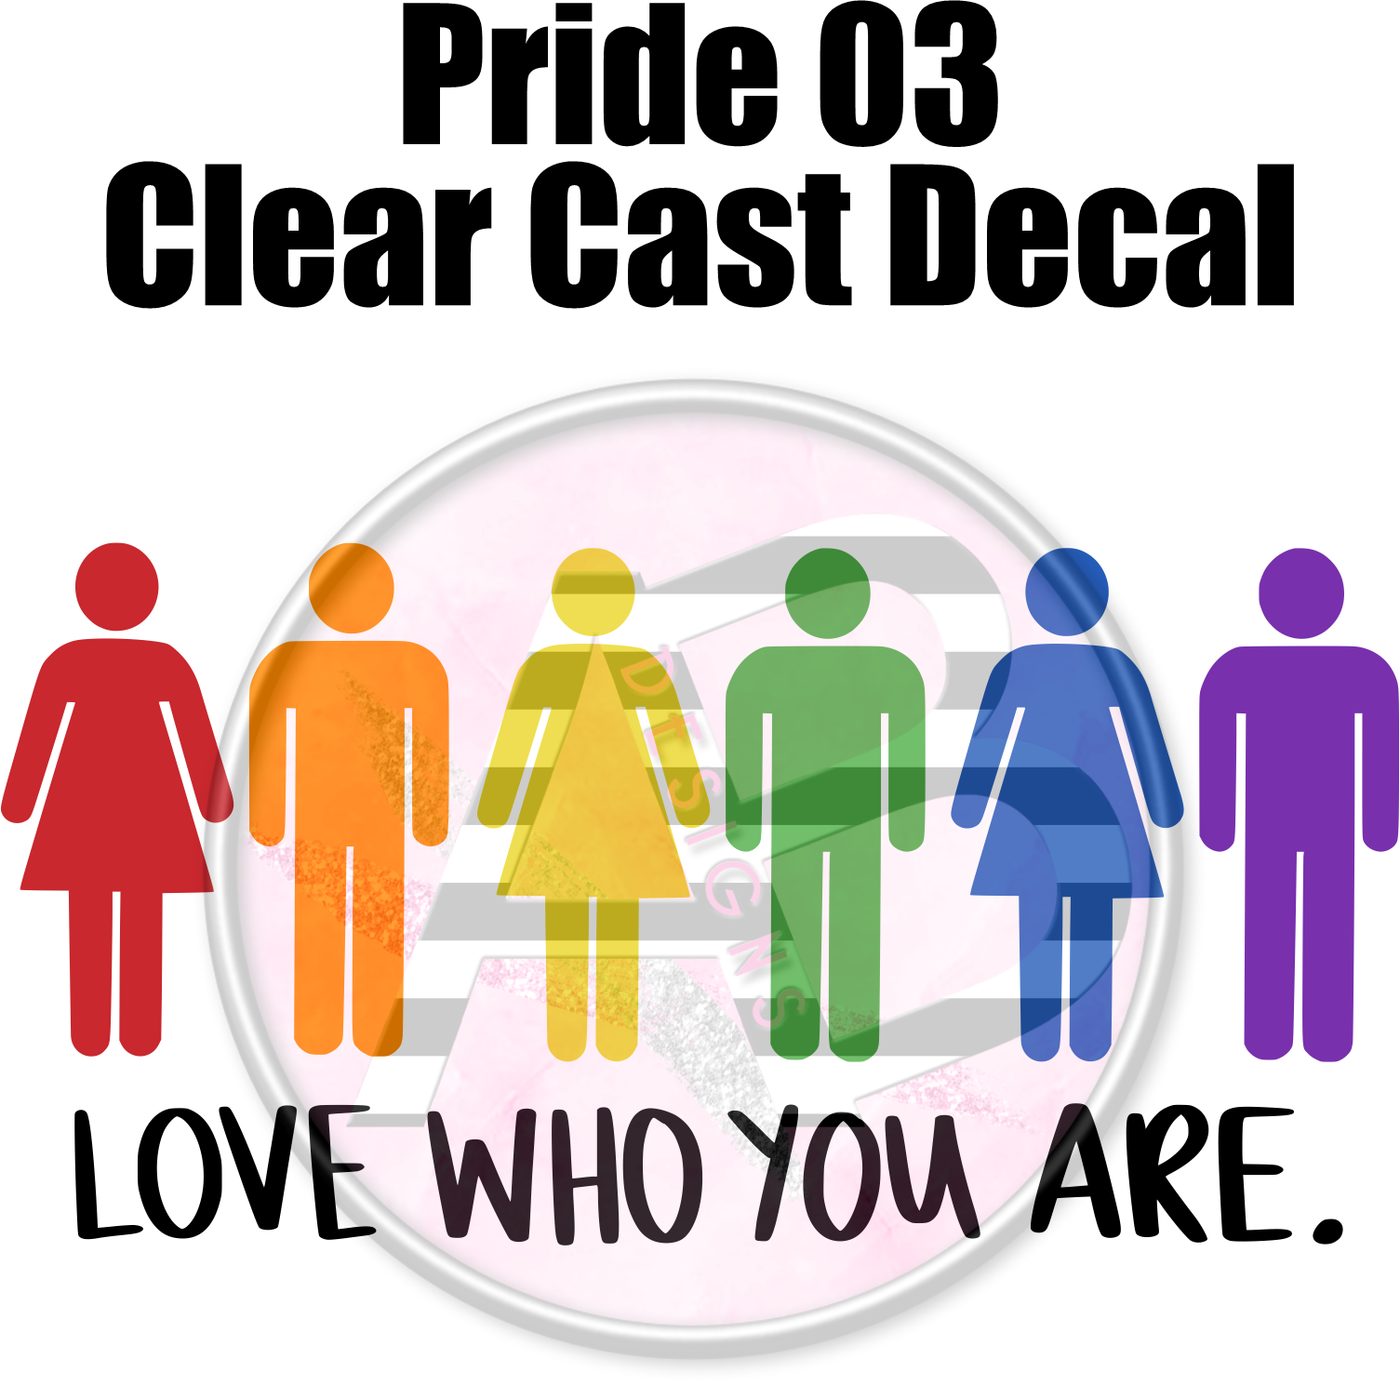 Pride 03 - Clear Cast Decal